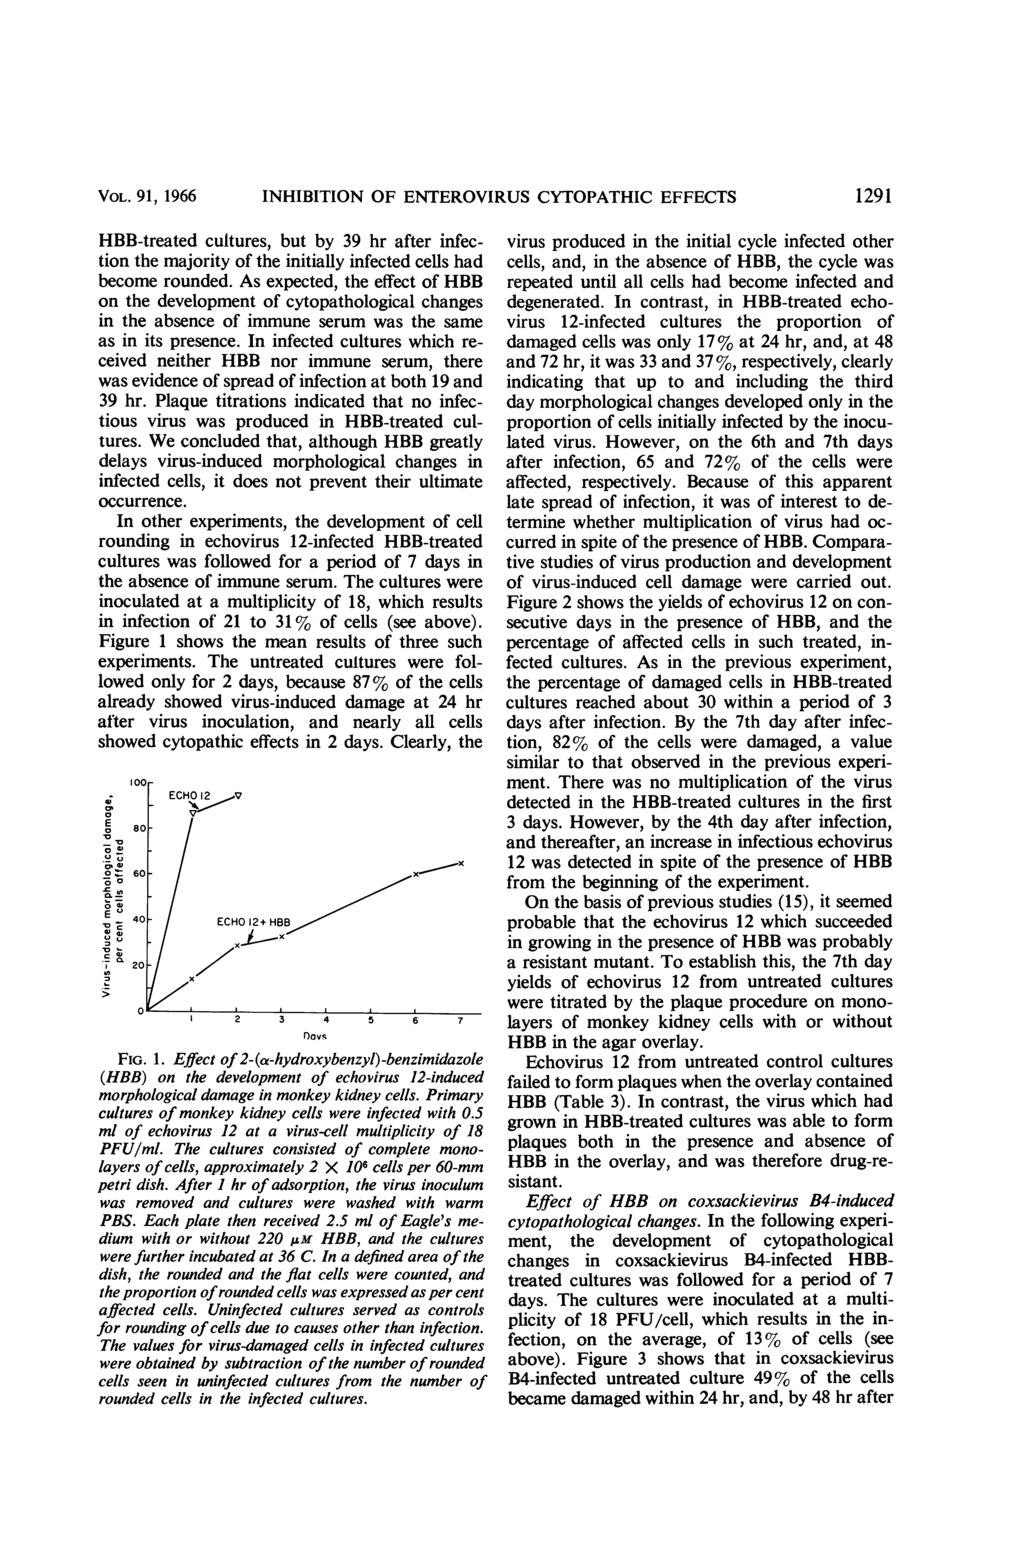 VOL. 91, 1966 NHBTON OF NTROVRUS CYTOPATHC FFCTS 1291 HBB-treated cultures, but by 39 hr after infection the majority of the initially infected cells had become rounded.